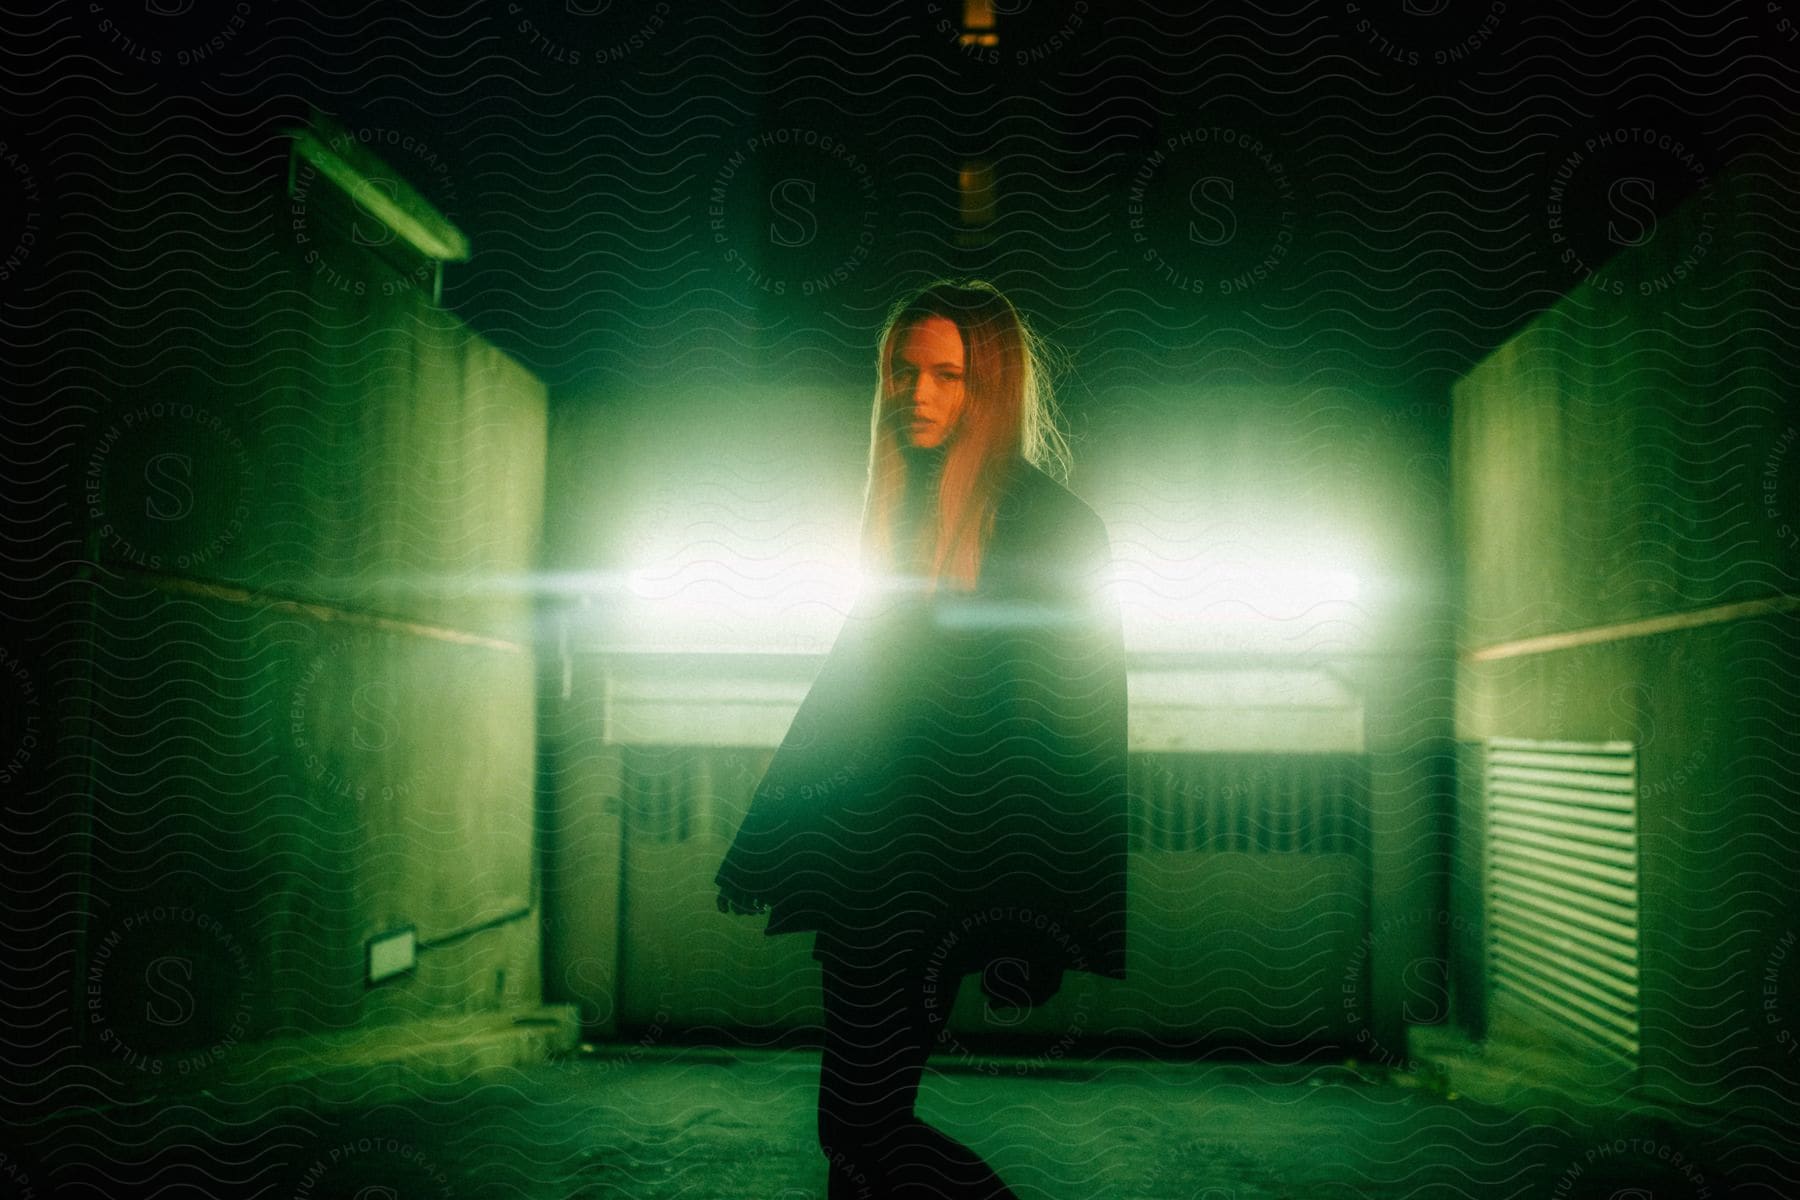 A woman wearing black stands in a room filled with green light as glowing beams shoot through her